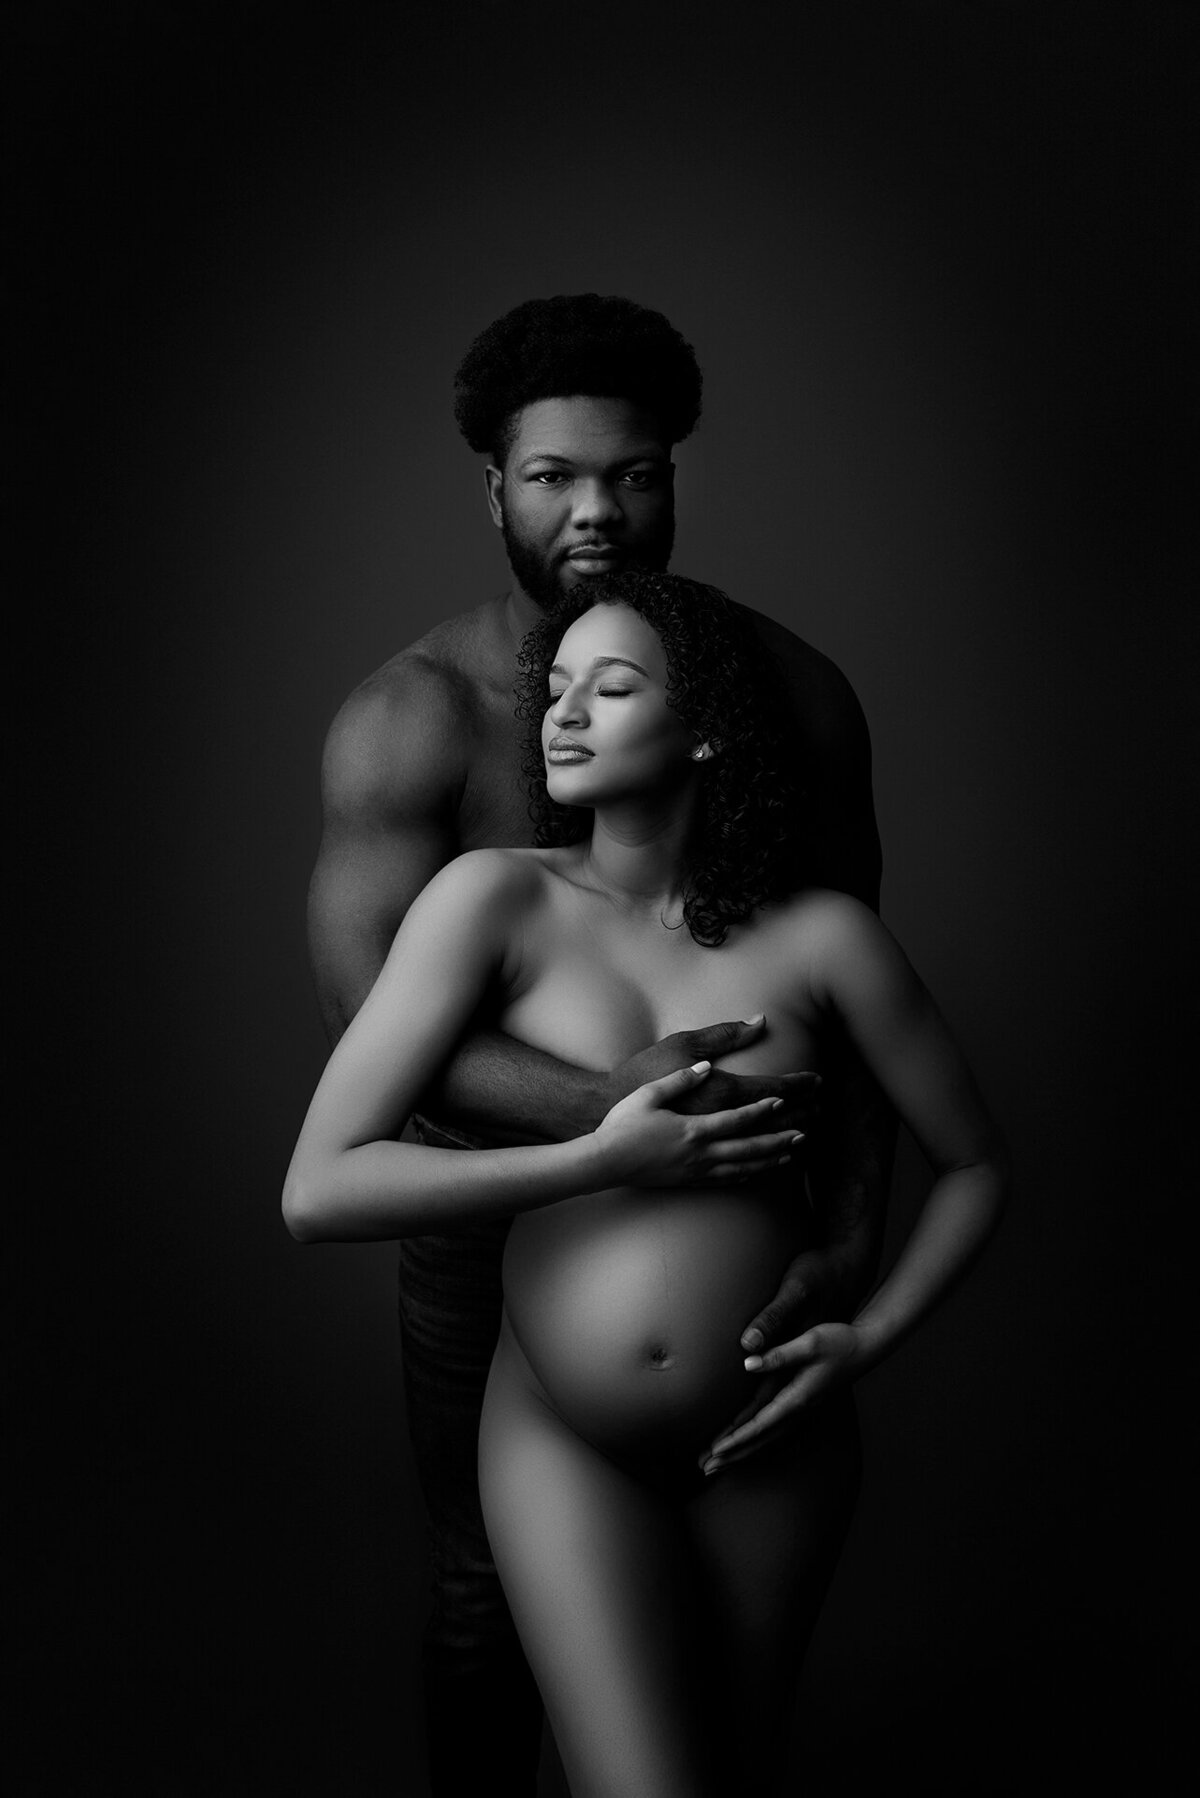 In this captivating black and white fine art maternity photograph, New Jersey's premier maternity photographer, Katie Marshall, skillfully frames a moment of intimate connection. The image features a woman facing the camera, her partner standing shirtless behind her. The man's forearm gently shields her breasts, while her head is turned to the left with closed eyes and a contemplative expression. Her hand cradles her baby bump with tenderness, and the man gazes at the camera with a serene, closed-mouth smile, revealing the depth of their connection in this timeless portrait.